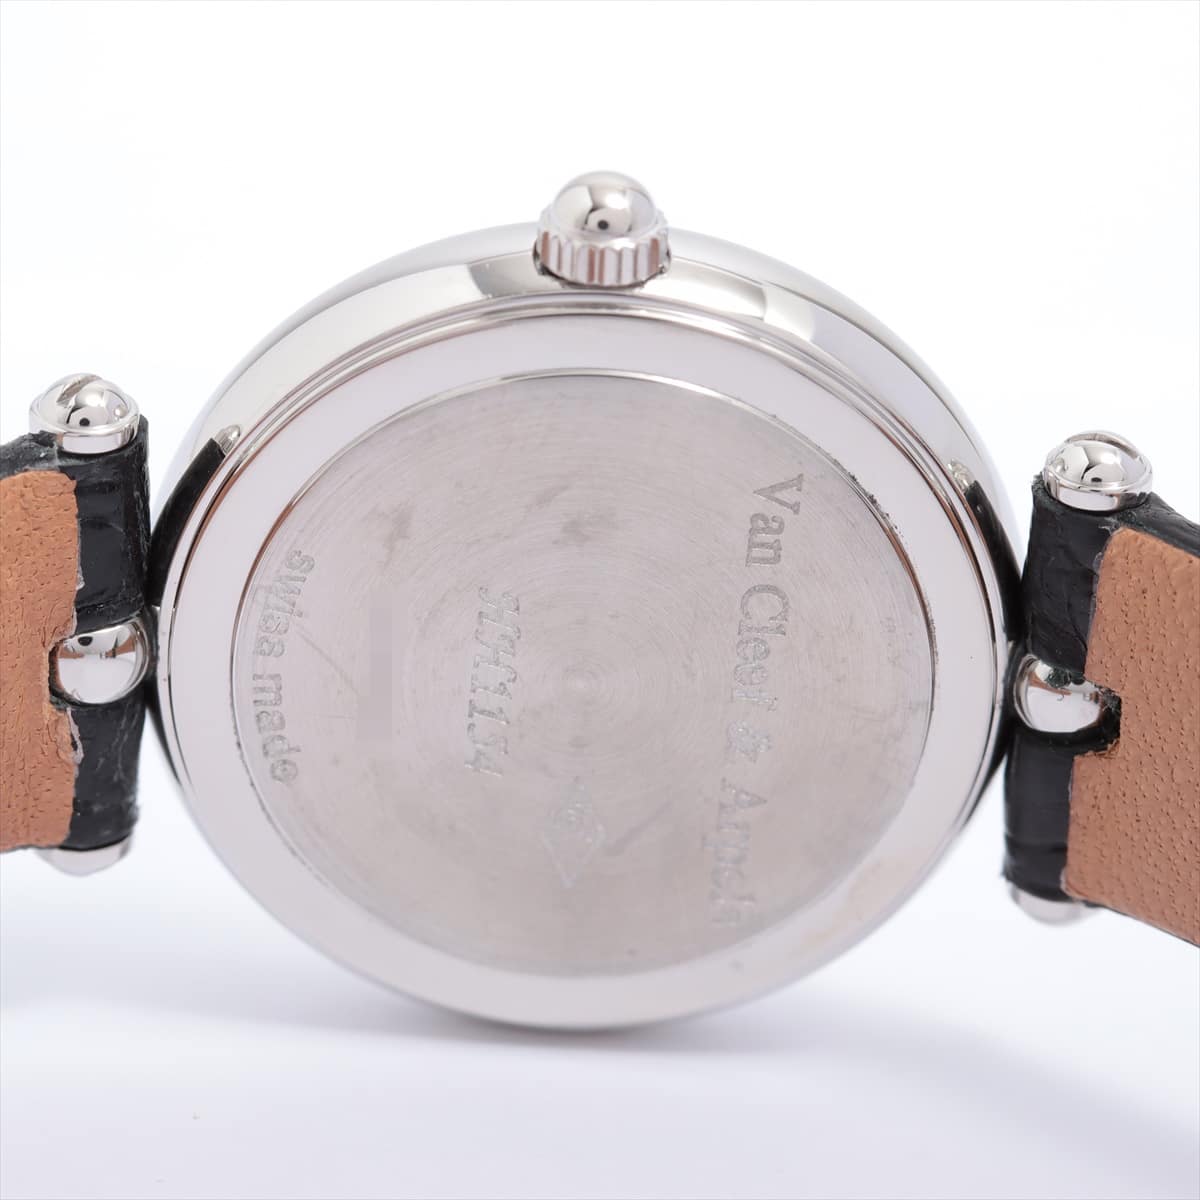 Van Cleef & Arpels Classic SS & externally manufactured leather QZ White-Face